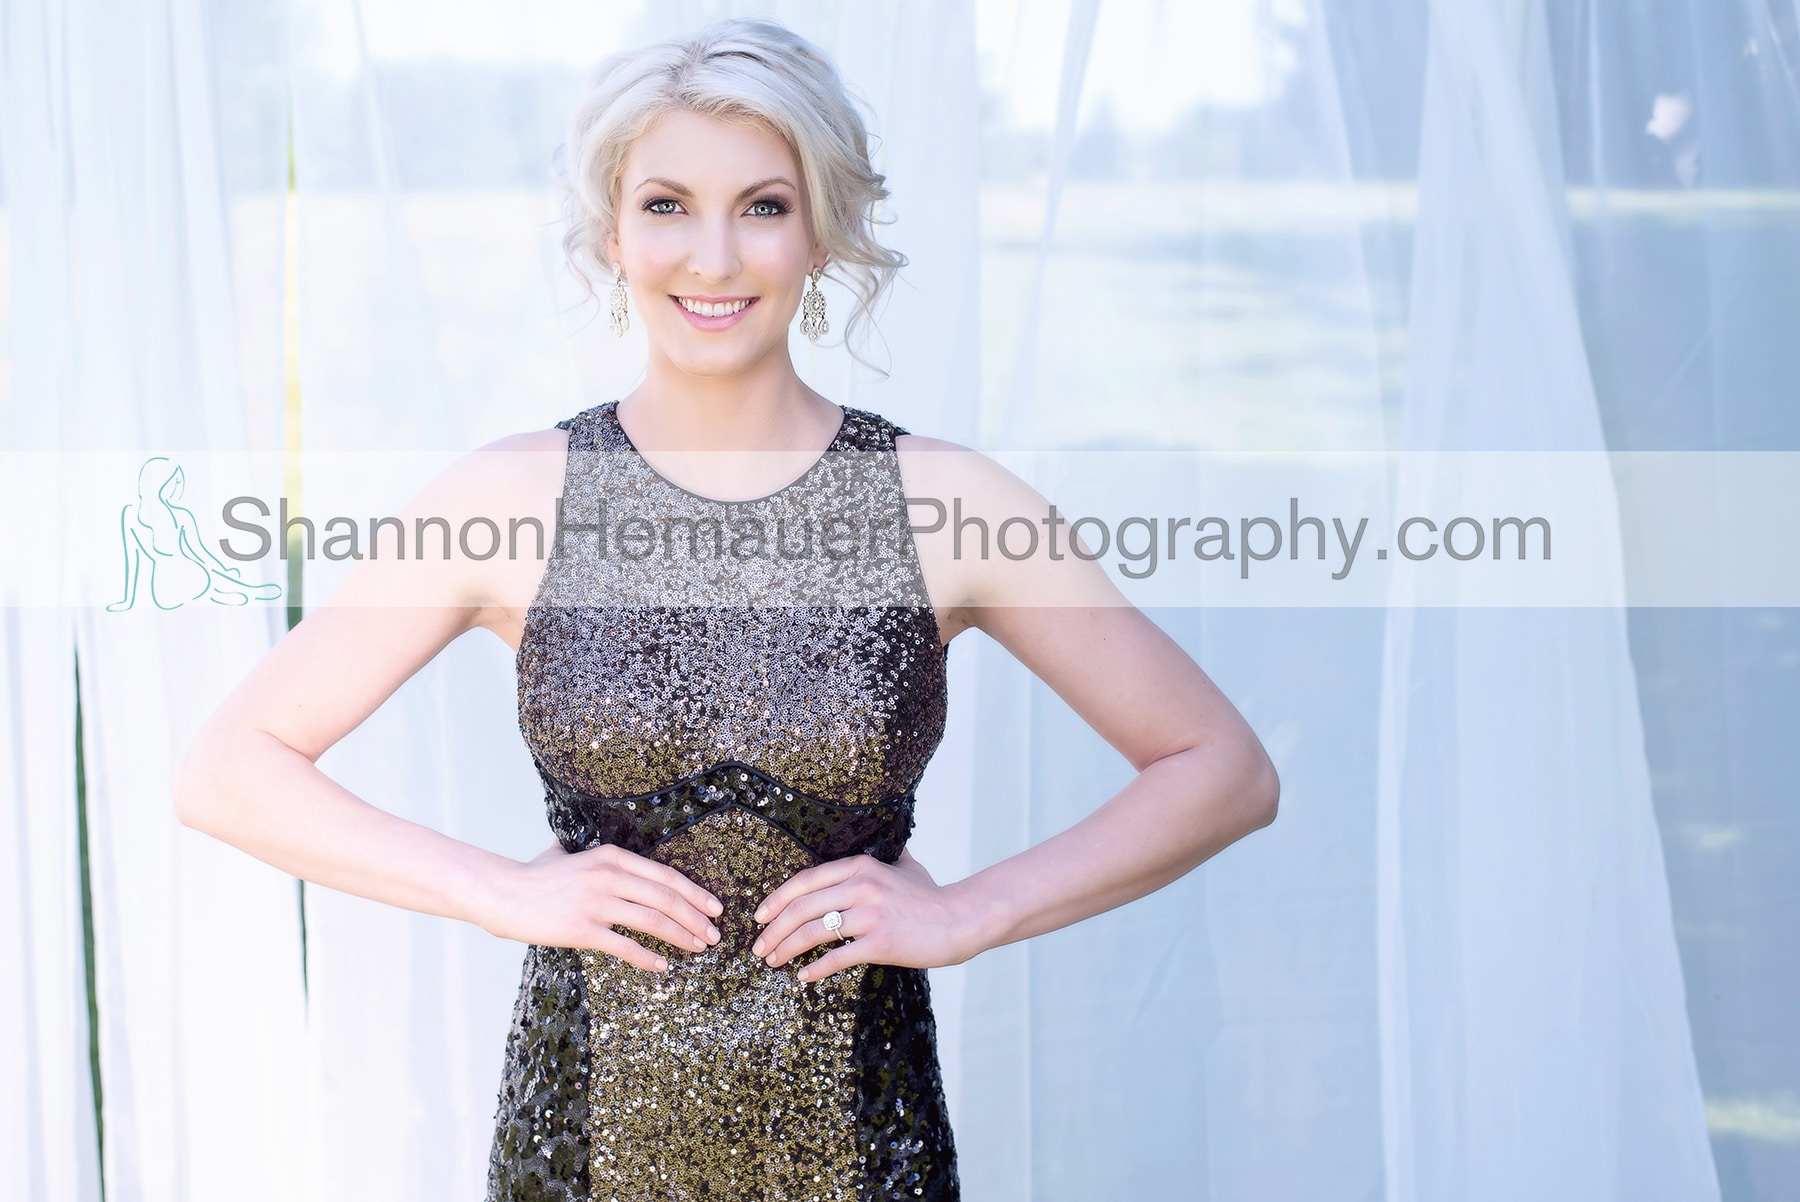 Contemporary Glamour | Shannon Hemauer Photography Dillsburg PA